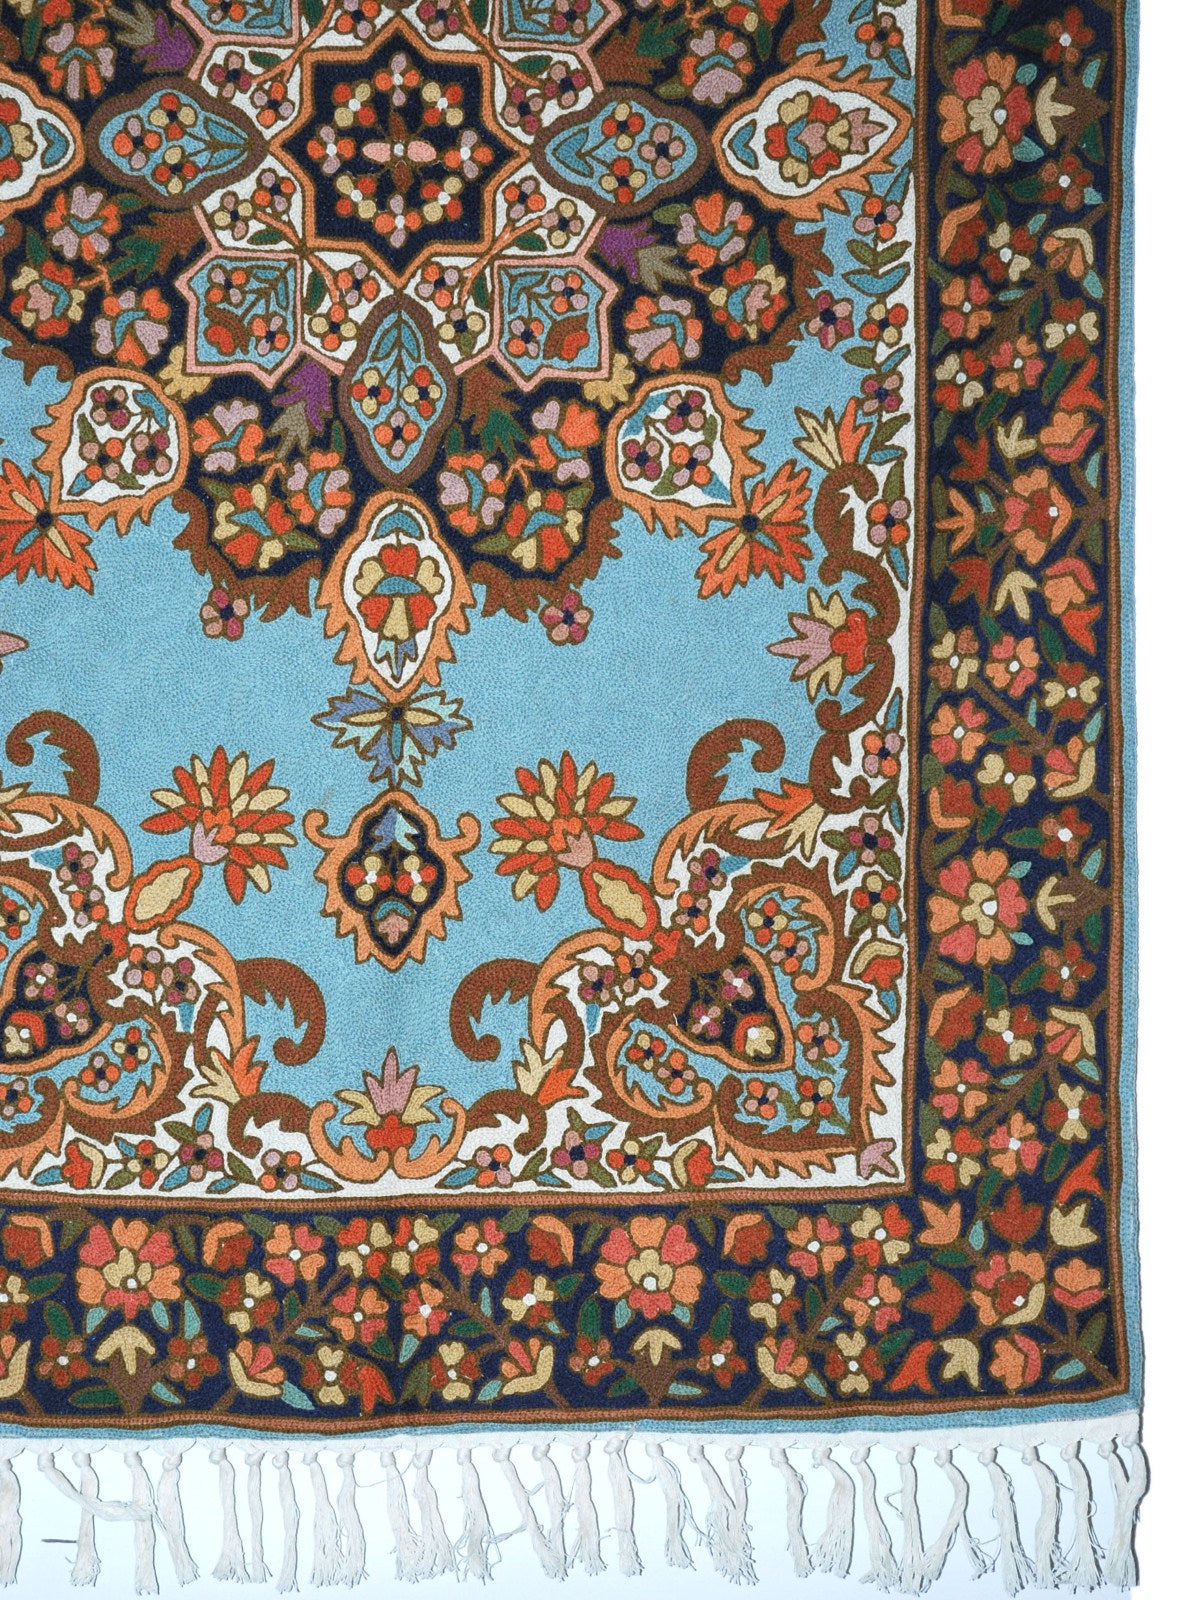 Kashmiri Wool Tapestry Area Rug, Multicolor Embroidery 3x5 feet #CWR15127